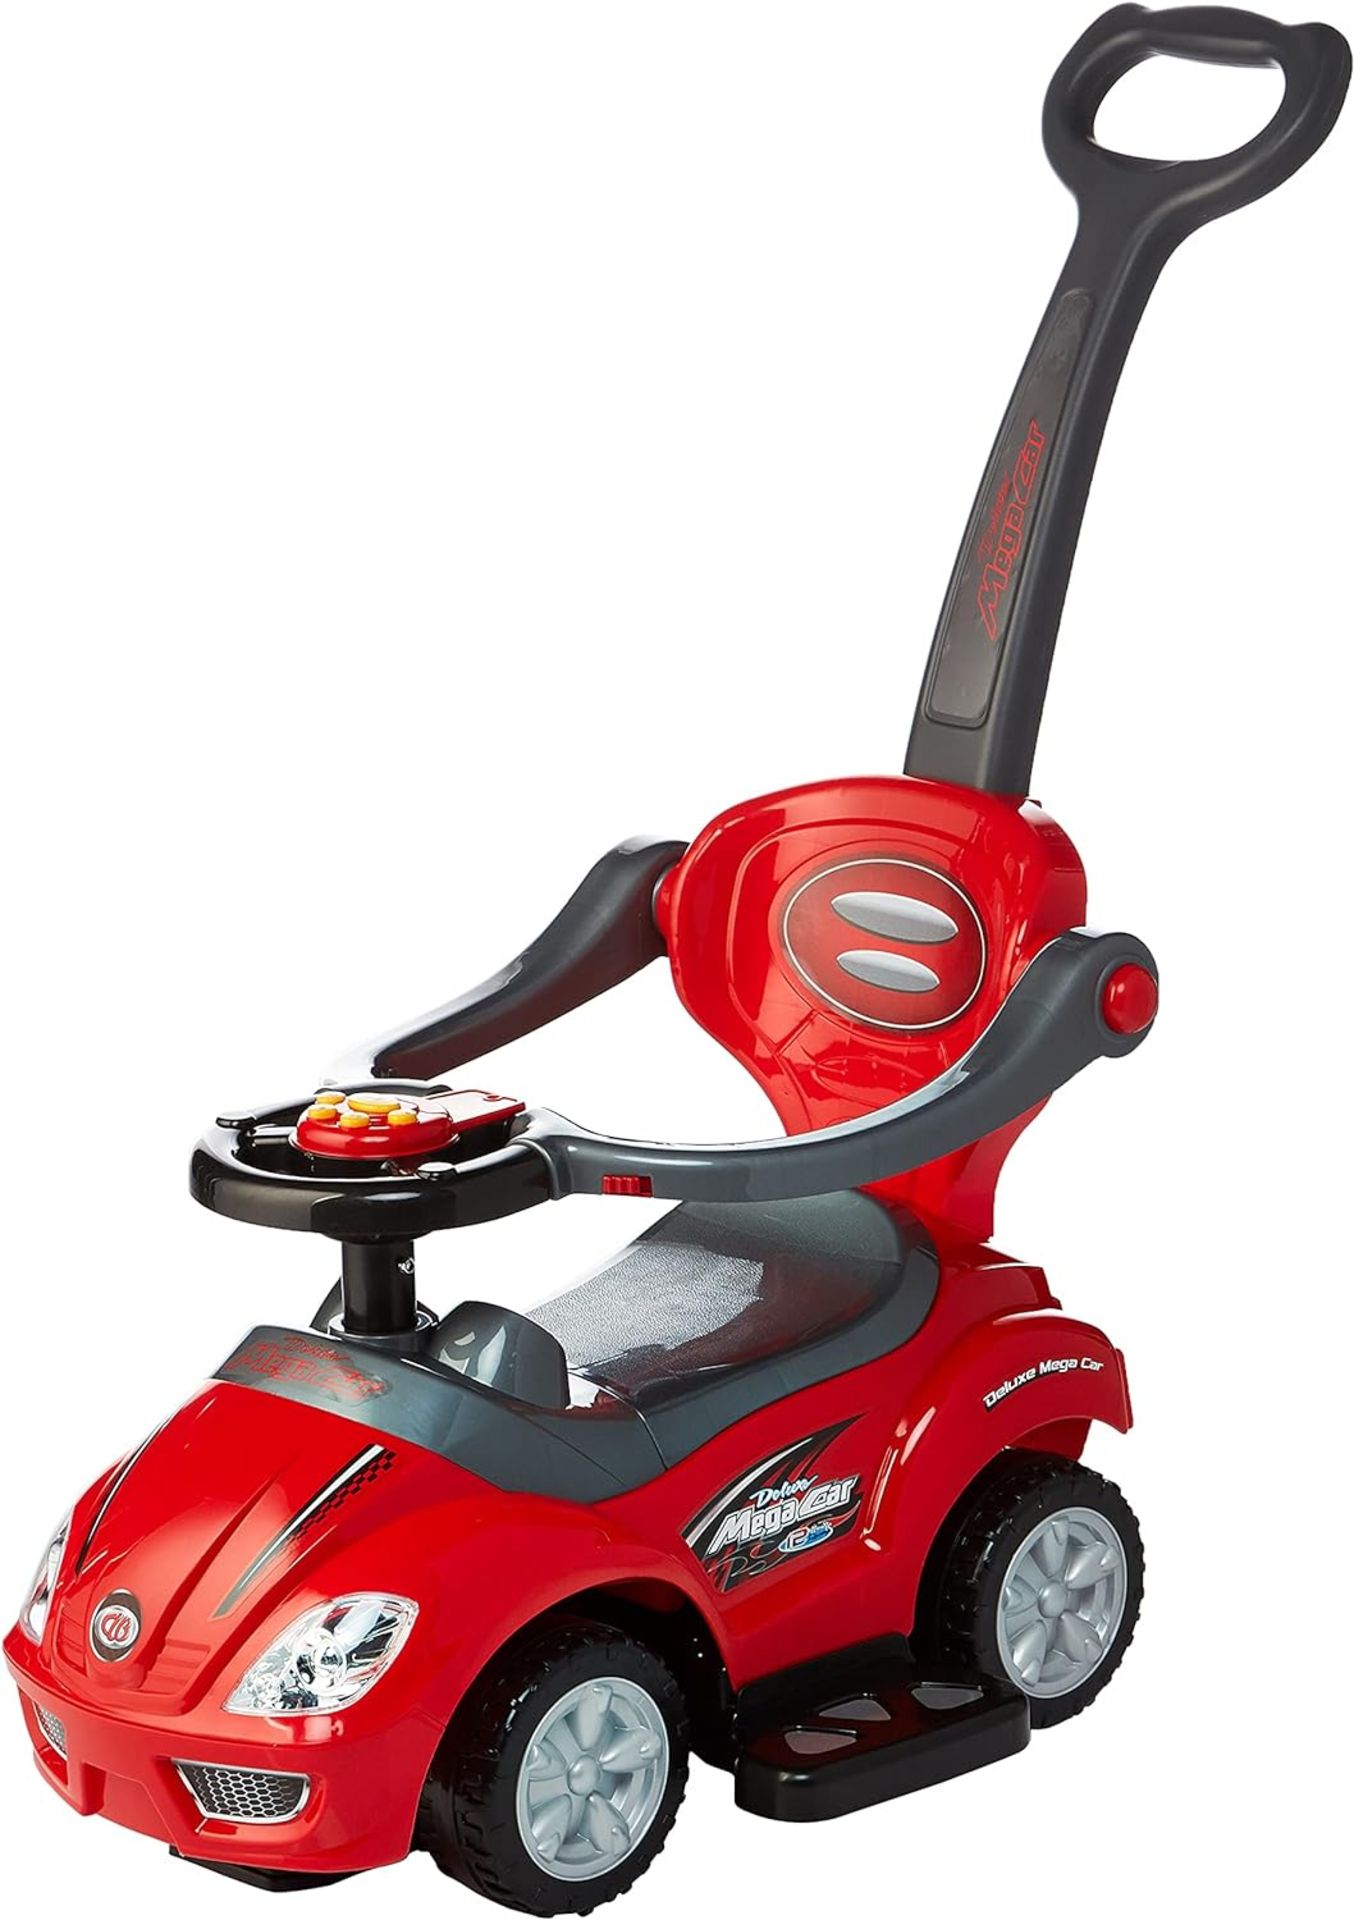 TRADE LOT 10 X BRAND NEW 3 IN1 RIDE ON PUSH CAR, BABY PUSH ALONG CAR WITH PARENT HANDLE PUSH BAR,